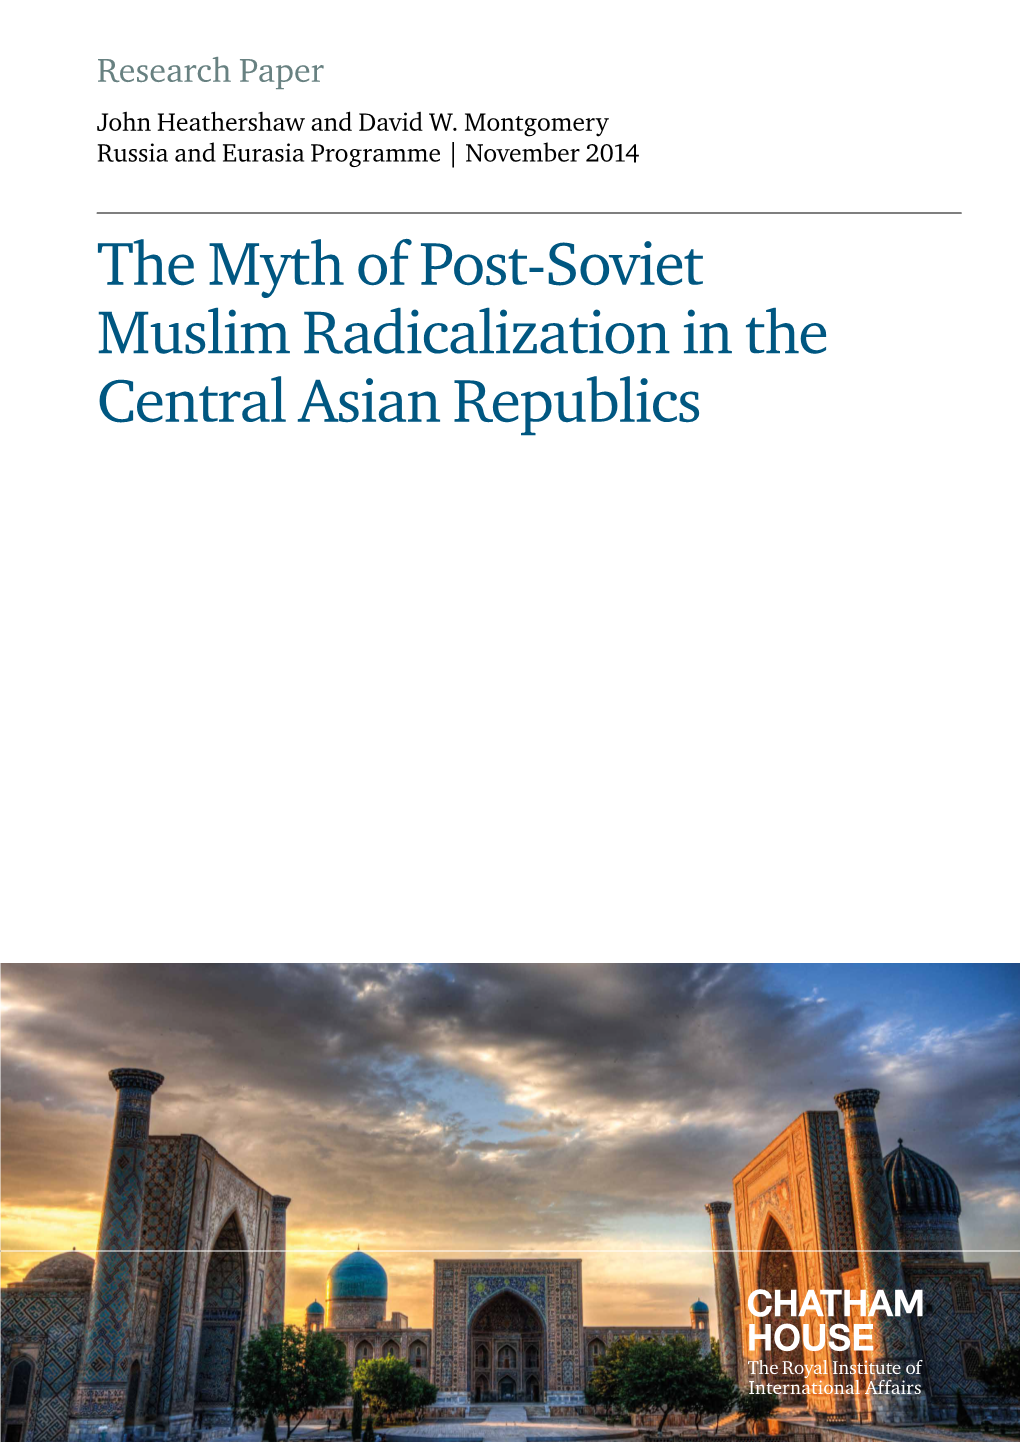 The Myth of Post-Soviet Muslim Radicalization in the Central Asian Republics the Myth of Post-Soviet Muslim Radicalization in the Central Asian Republics